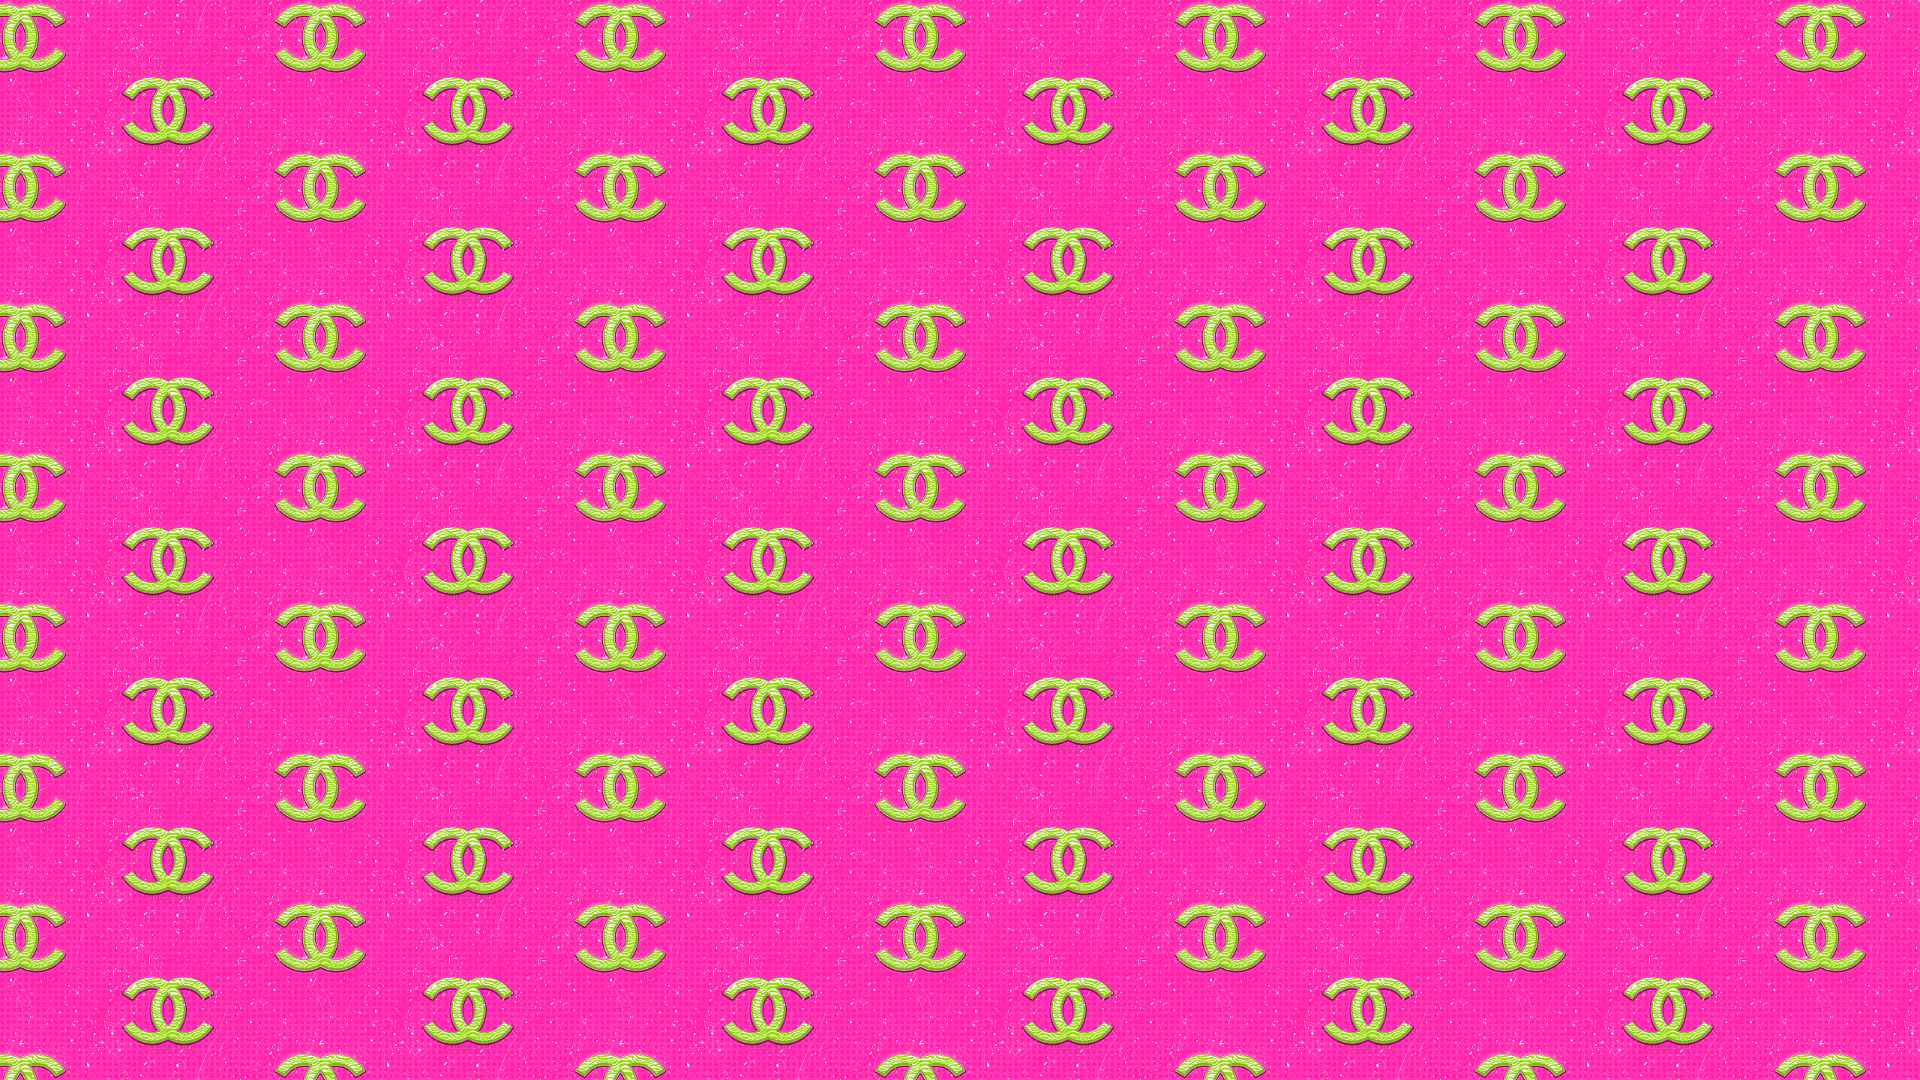 Pink Chanel Wallpapers